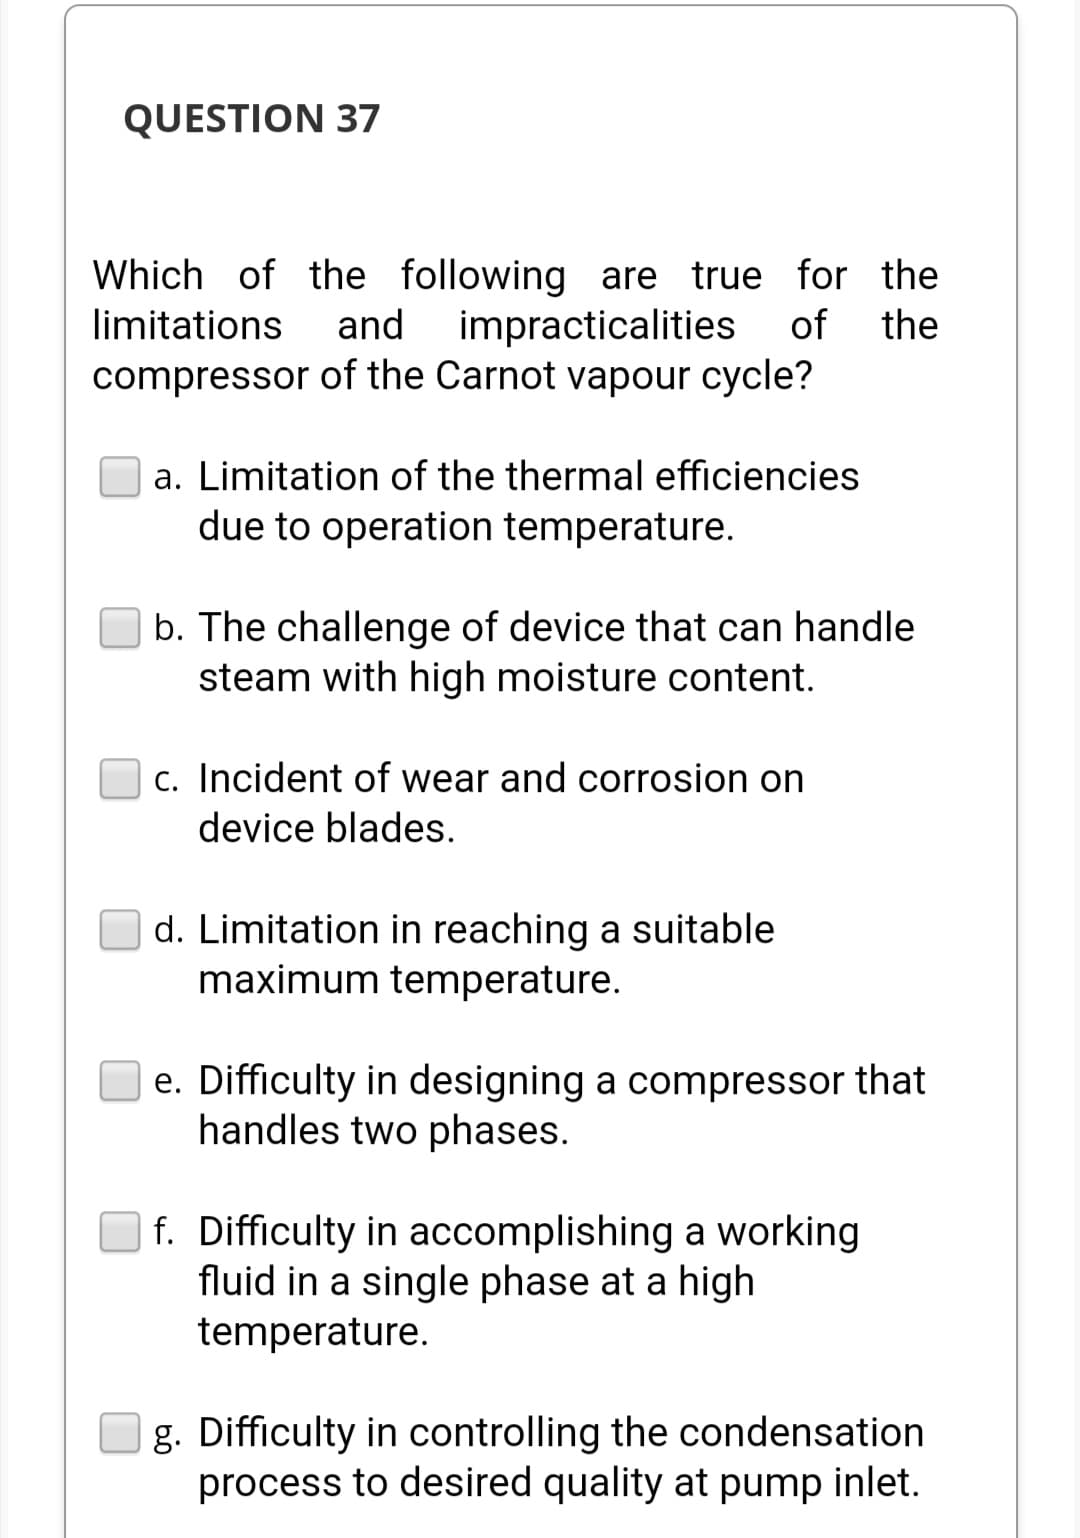 QUESTION 37
the
Which of the following are true for
limitations and impracticalities of the
compressor of the Carnot vapour cycle?
a. Limitation of the thermal efficiencies
due to operation temperature.
b. The challenge of device that can handle
steam with high moisture content.
c. Incident of wear and corrosion on
device blades.
d. Limitation in reaching a suitable
maximum temperature.
e. Difficulty in designing a compressor that
handles two phases.
f. Difficulty in accomplishing a working
fluid in a single phase at a high
temperature.
g. Difficulty in controlling the condensation
process to desired quality at pump inlet.